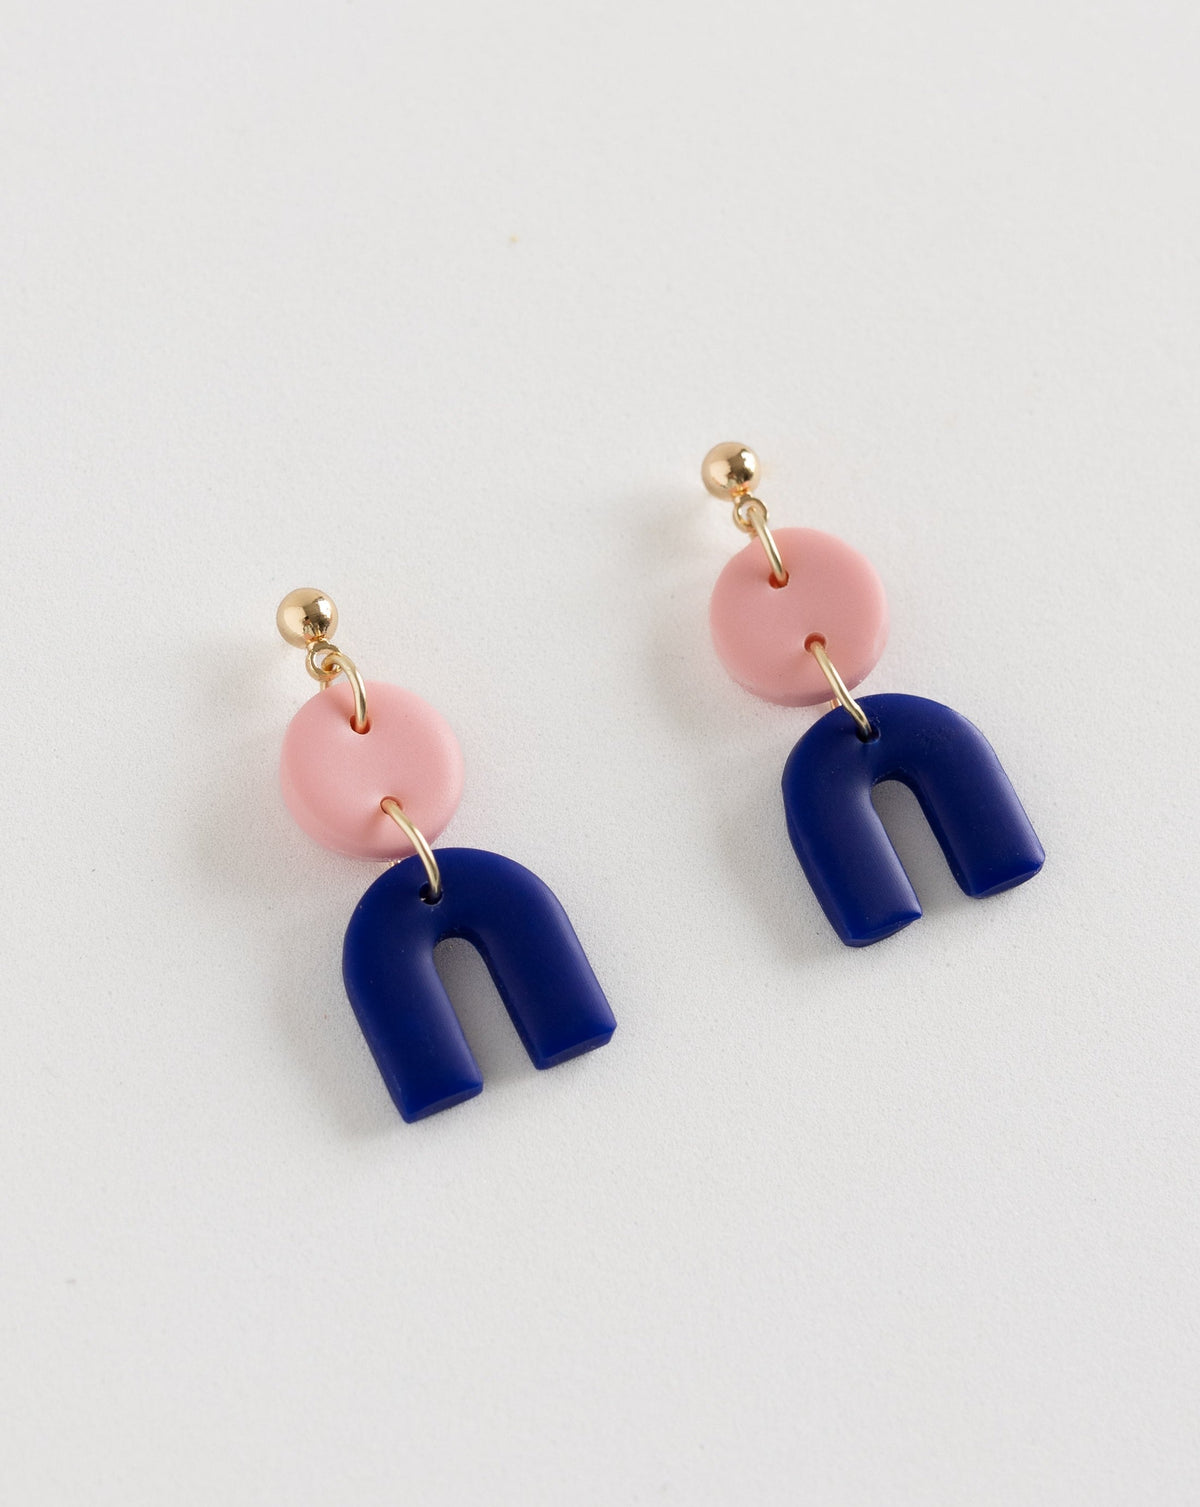 Tiny Arch earrings in two part of Sof pink and Hue Blue polymer clay parts with Gold plated Ball studs, angled view.